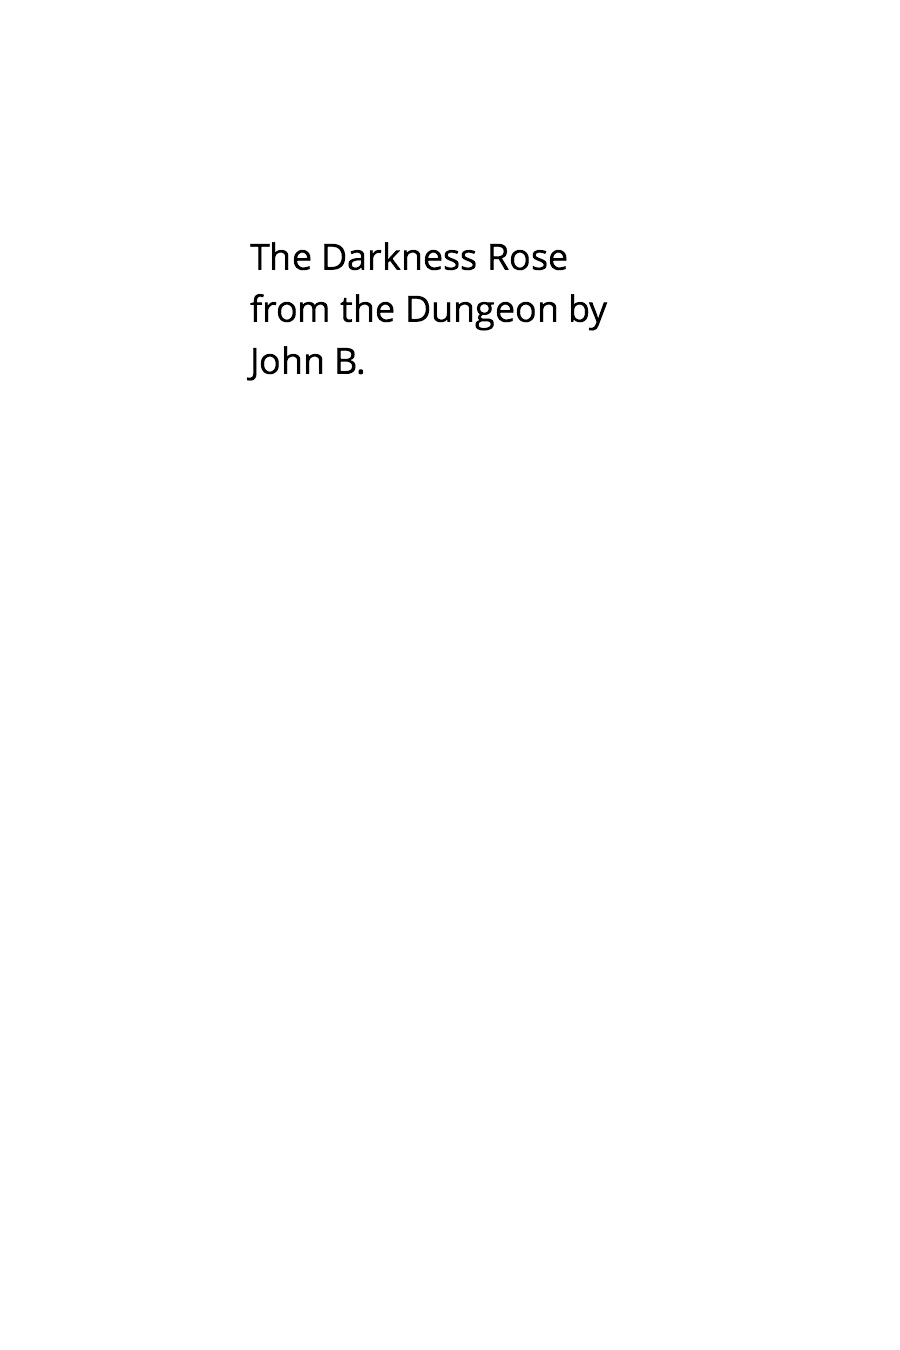 The Darkness Rose from the Dungeon by John B